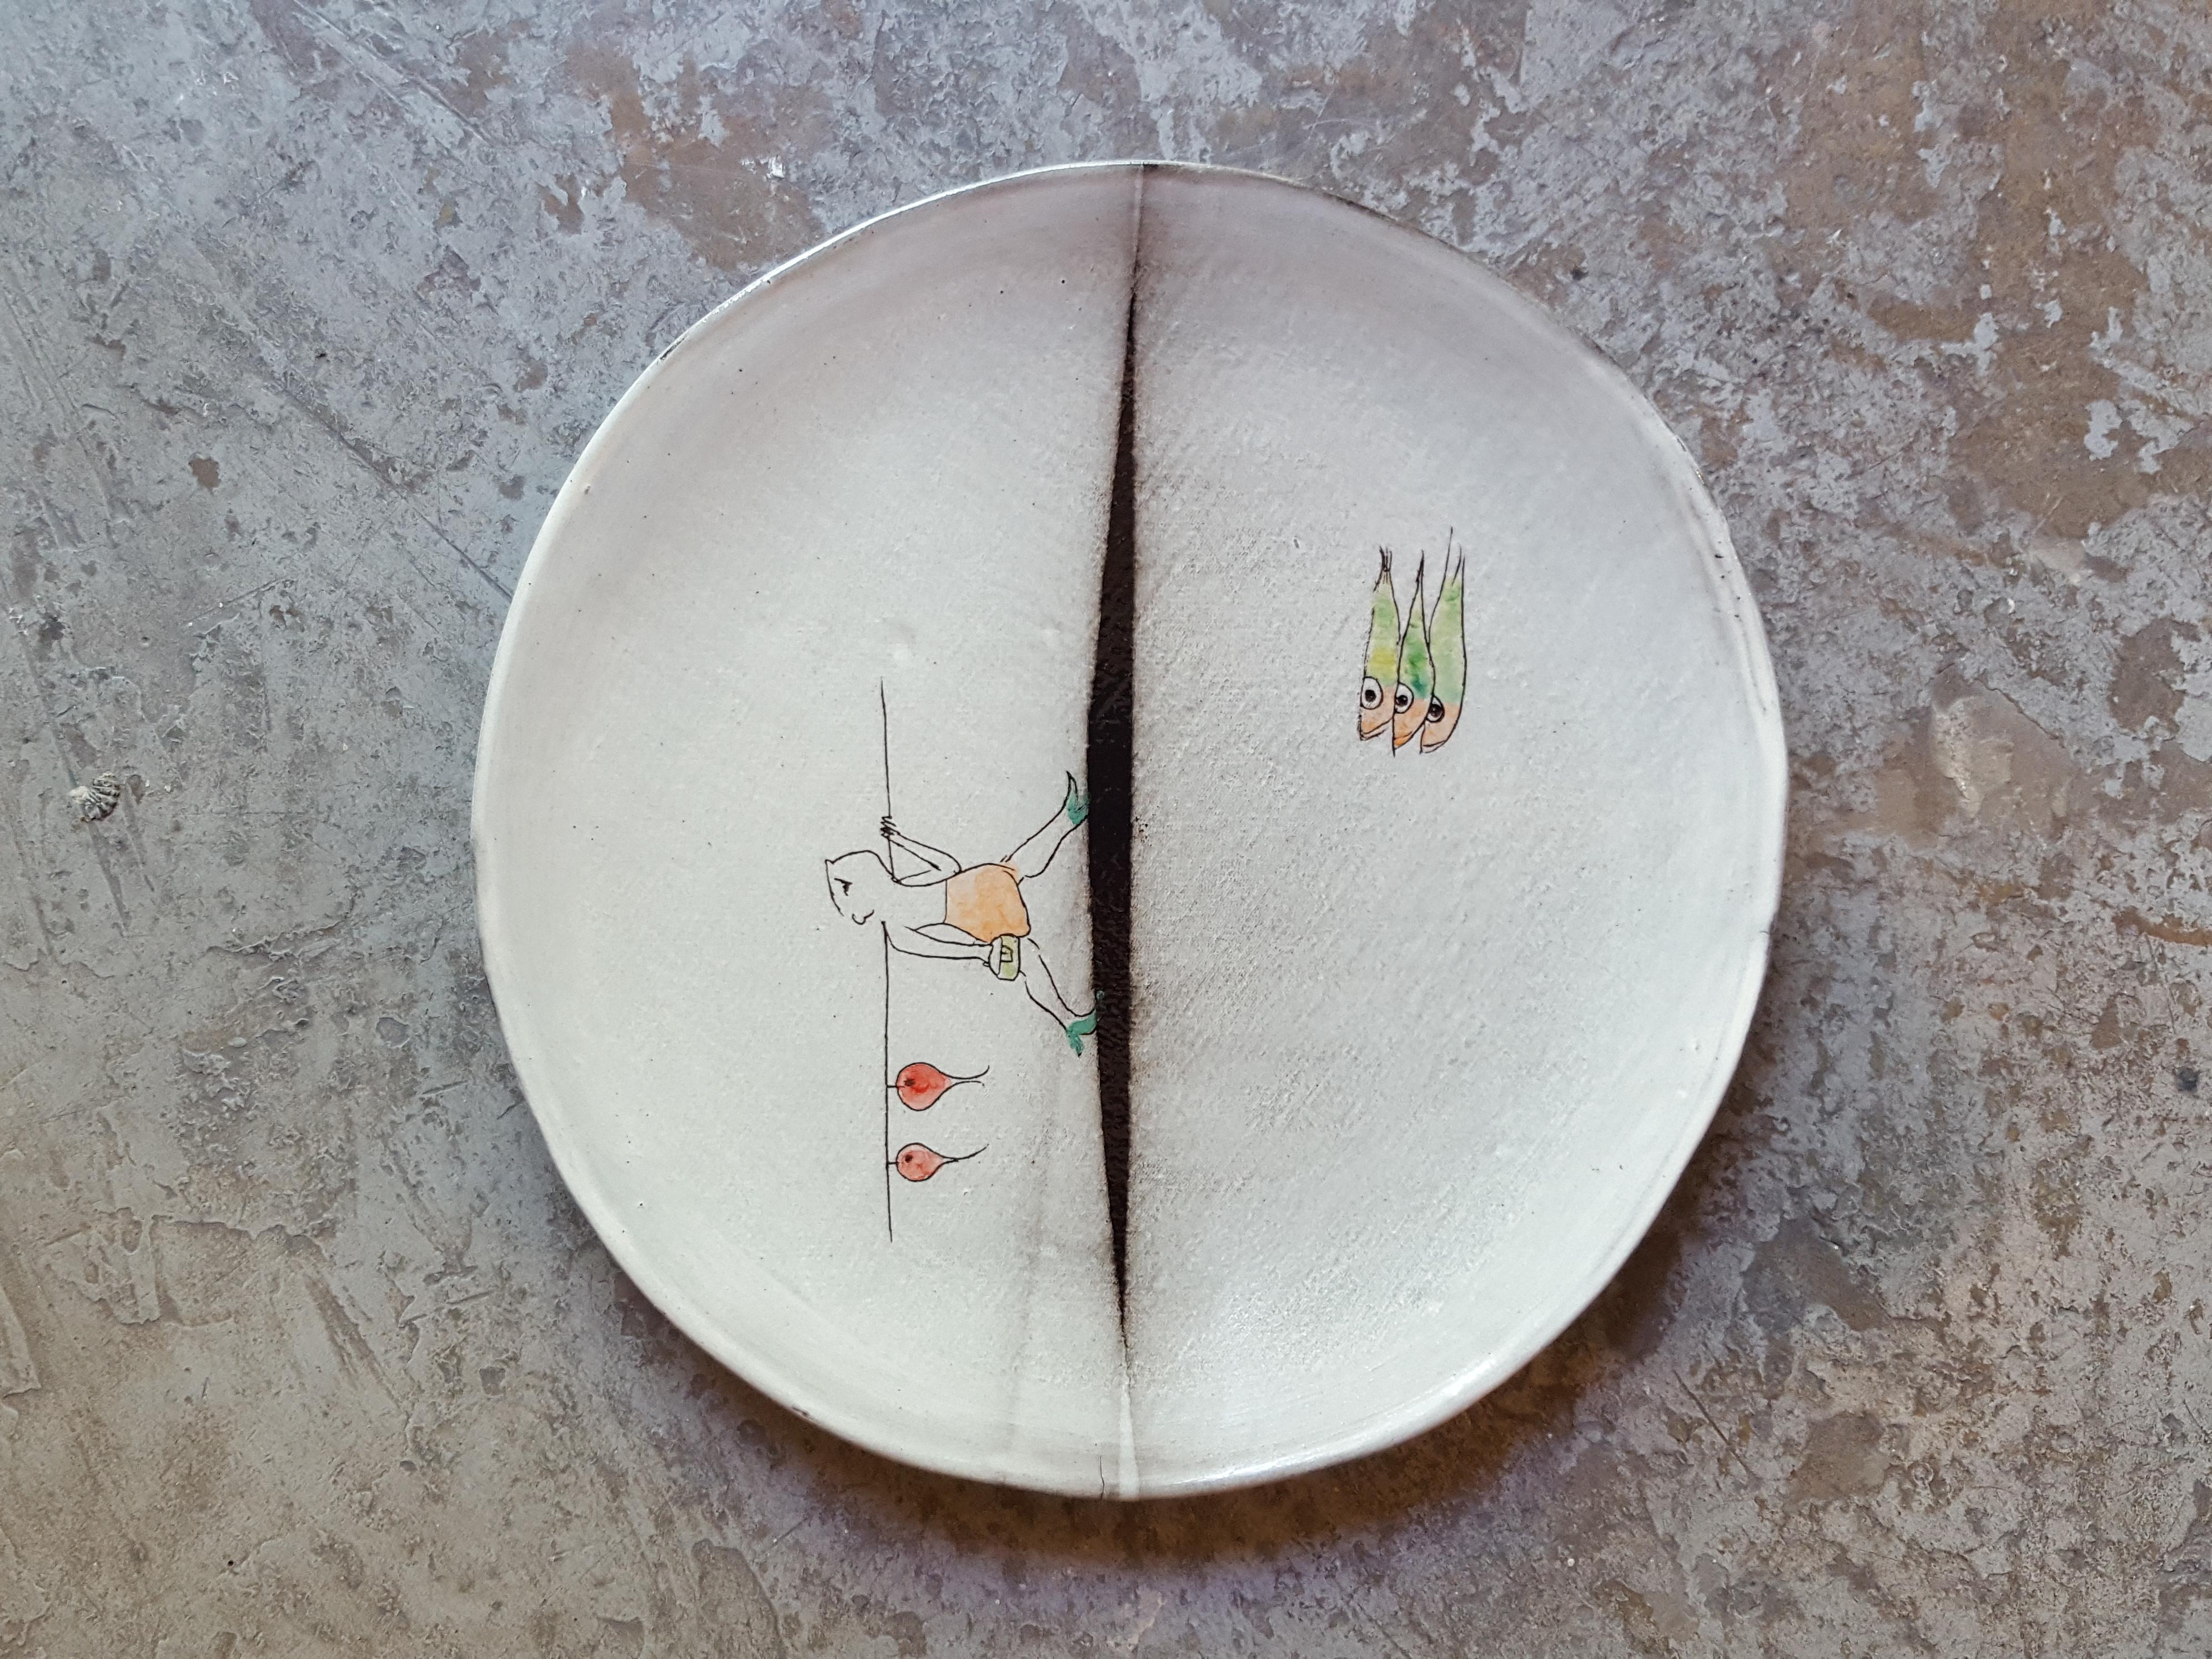 Ceramic earthenware Faience dinner plate artist creation, all handmade in France.
Using plaques of dark Faience, graffiti, paint and enamel.
Decoration hand painted with the artist's creative poetic characters limited edition.
There are different